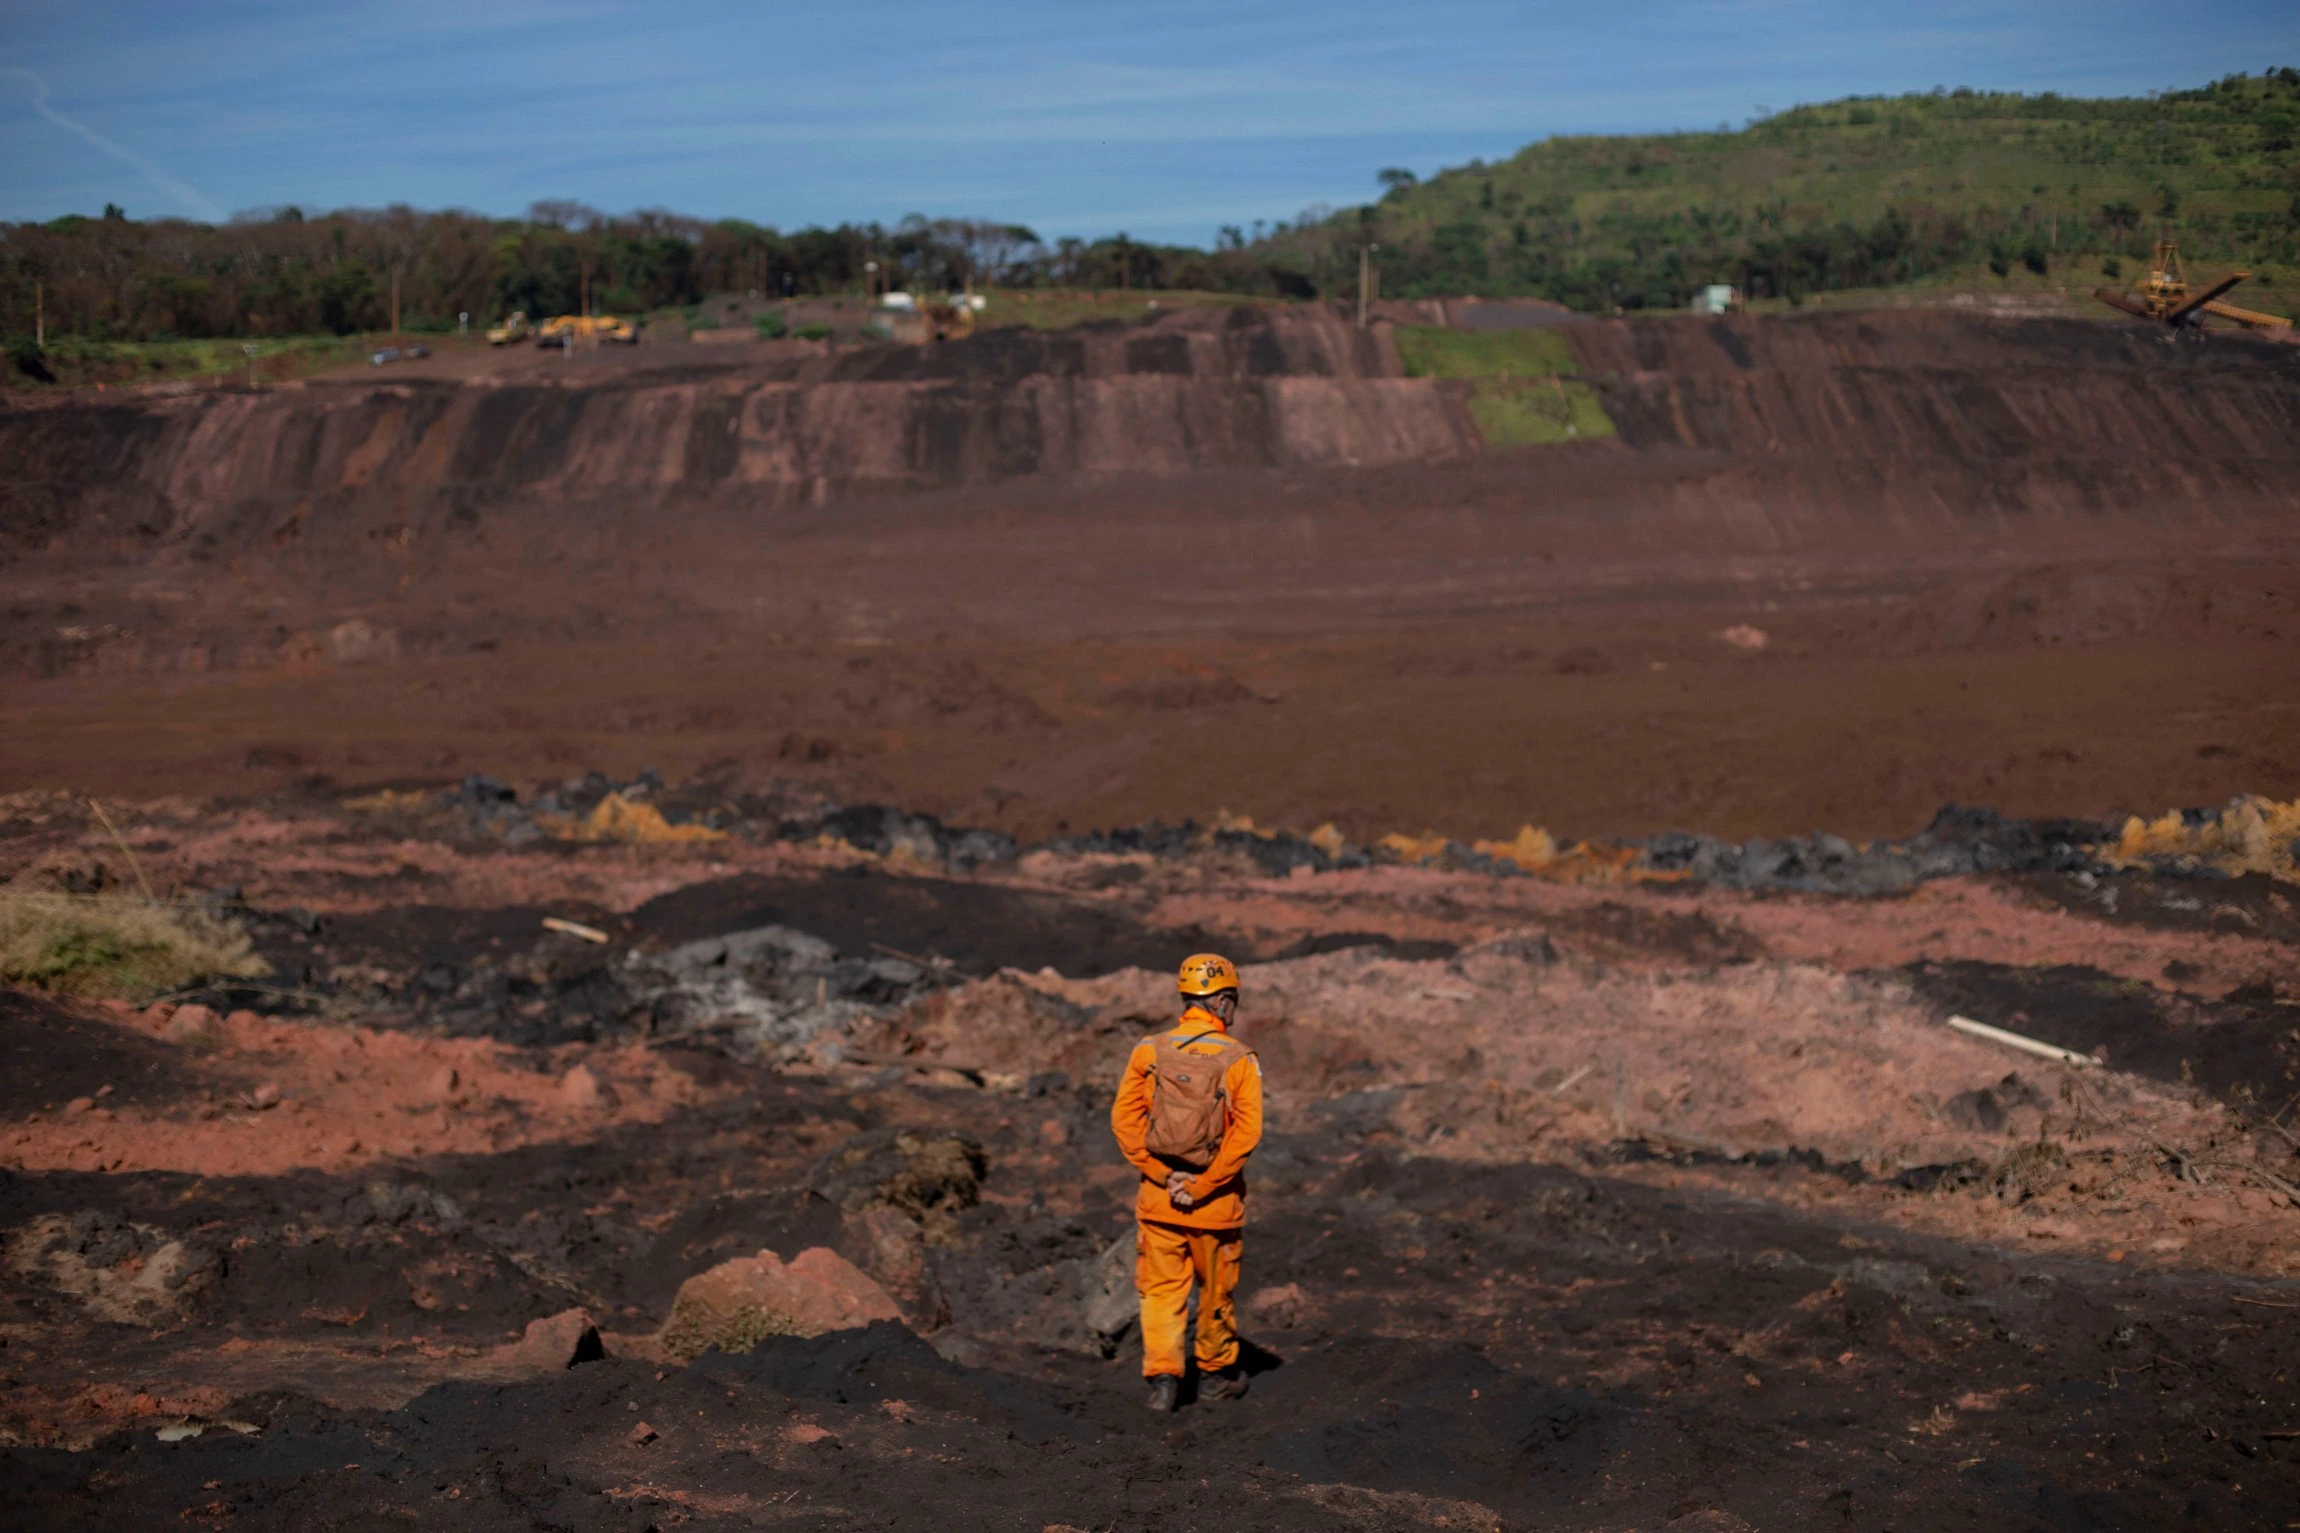 Minas Gerais Firefighters keep on searching for victims at Corrego do Feijao where last January 25, a dam collapsed at an iron-ore mine belonging to Brazil's giant mining company Vale near the town of Brumadinho in the state of Minas Gerais.